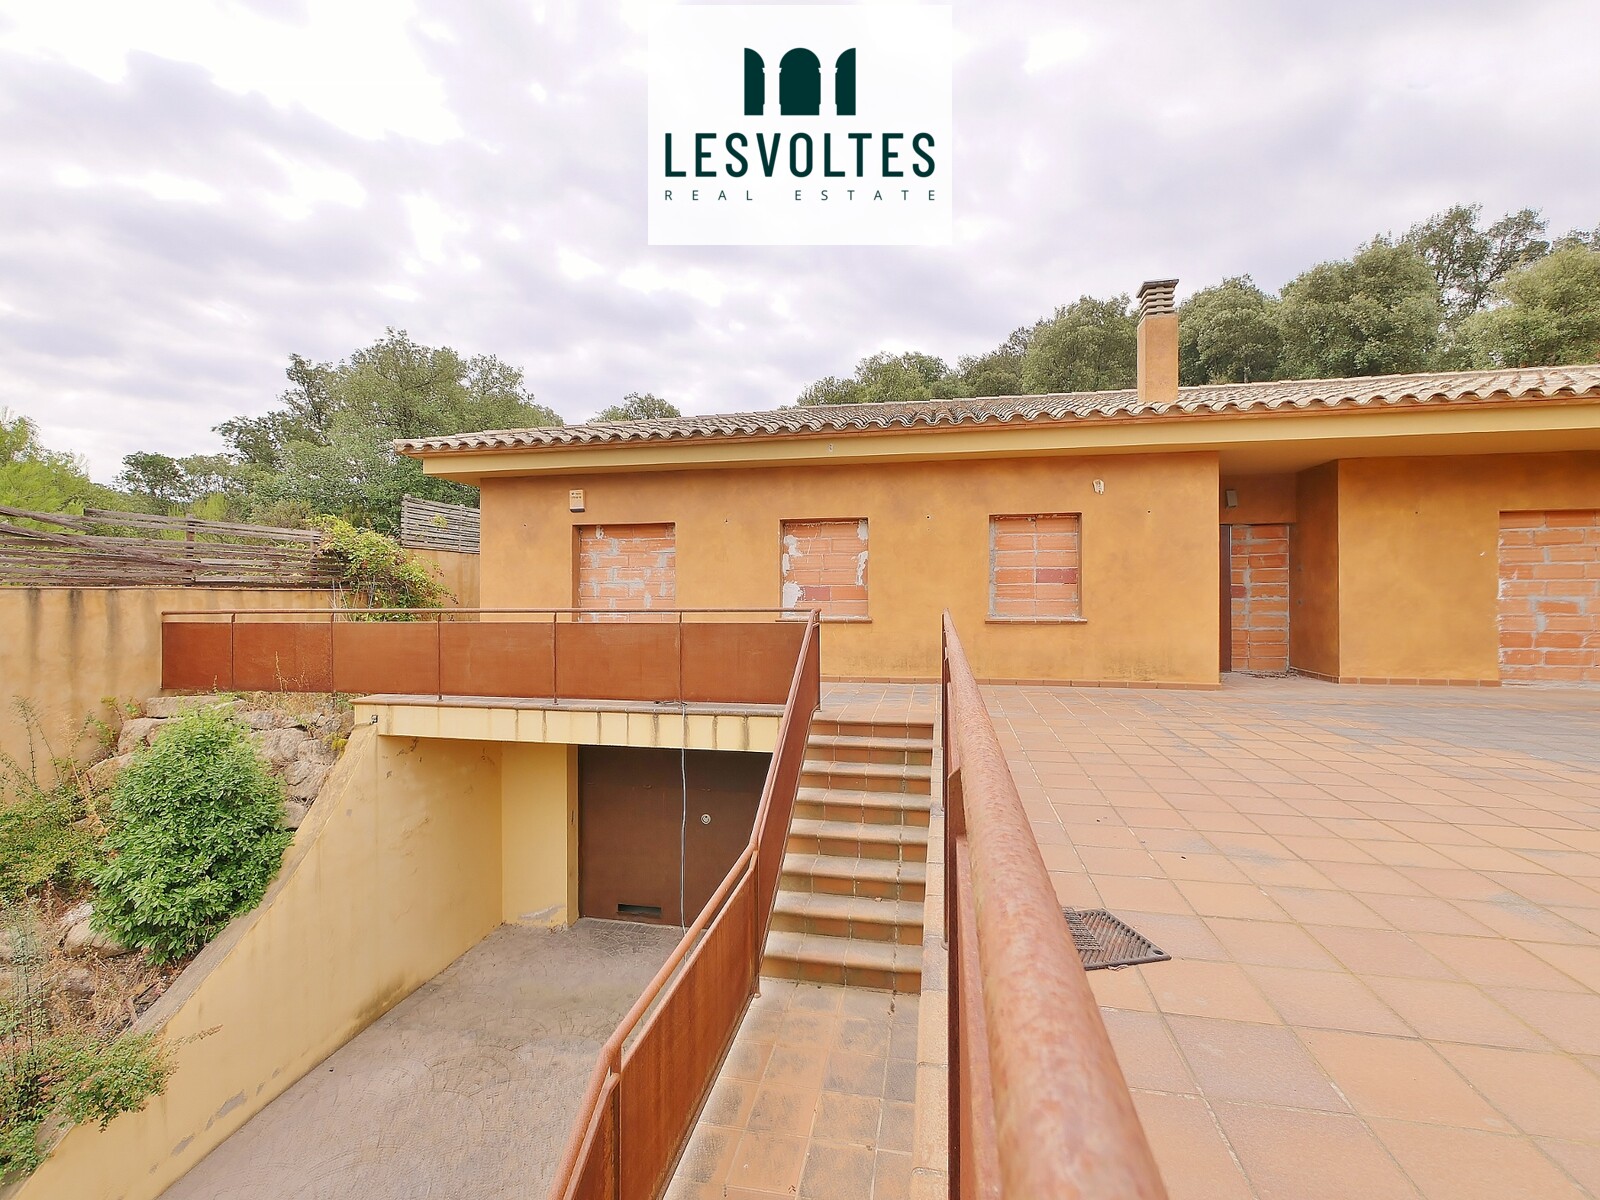 OPPORTUNITY! HOUSE OF 362 M2 WITH VIEWS ON A GOOD PLOT OF 1,000M2 WITH GARDEN AND SWIMMING POOL.